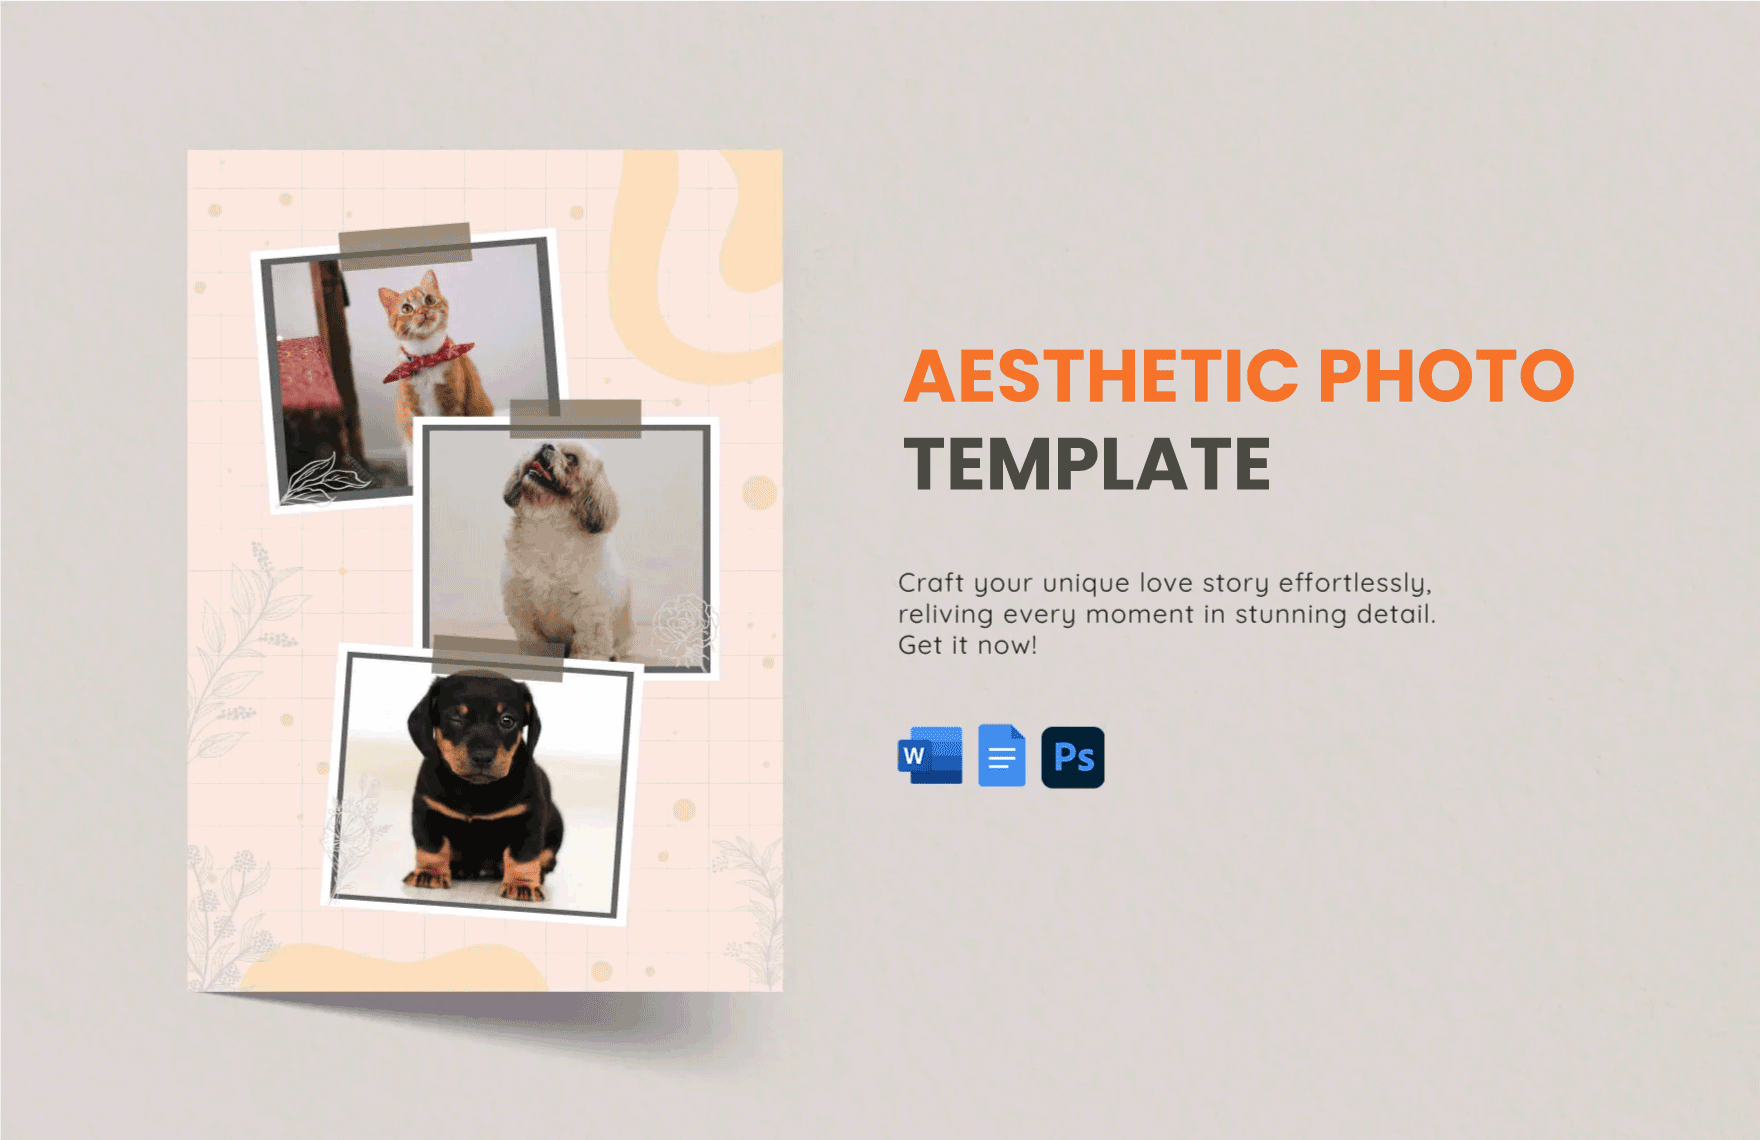 Aesthetic Photo Template in Word, Google Docs, PSD